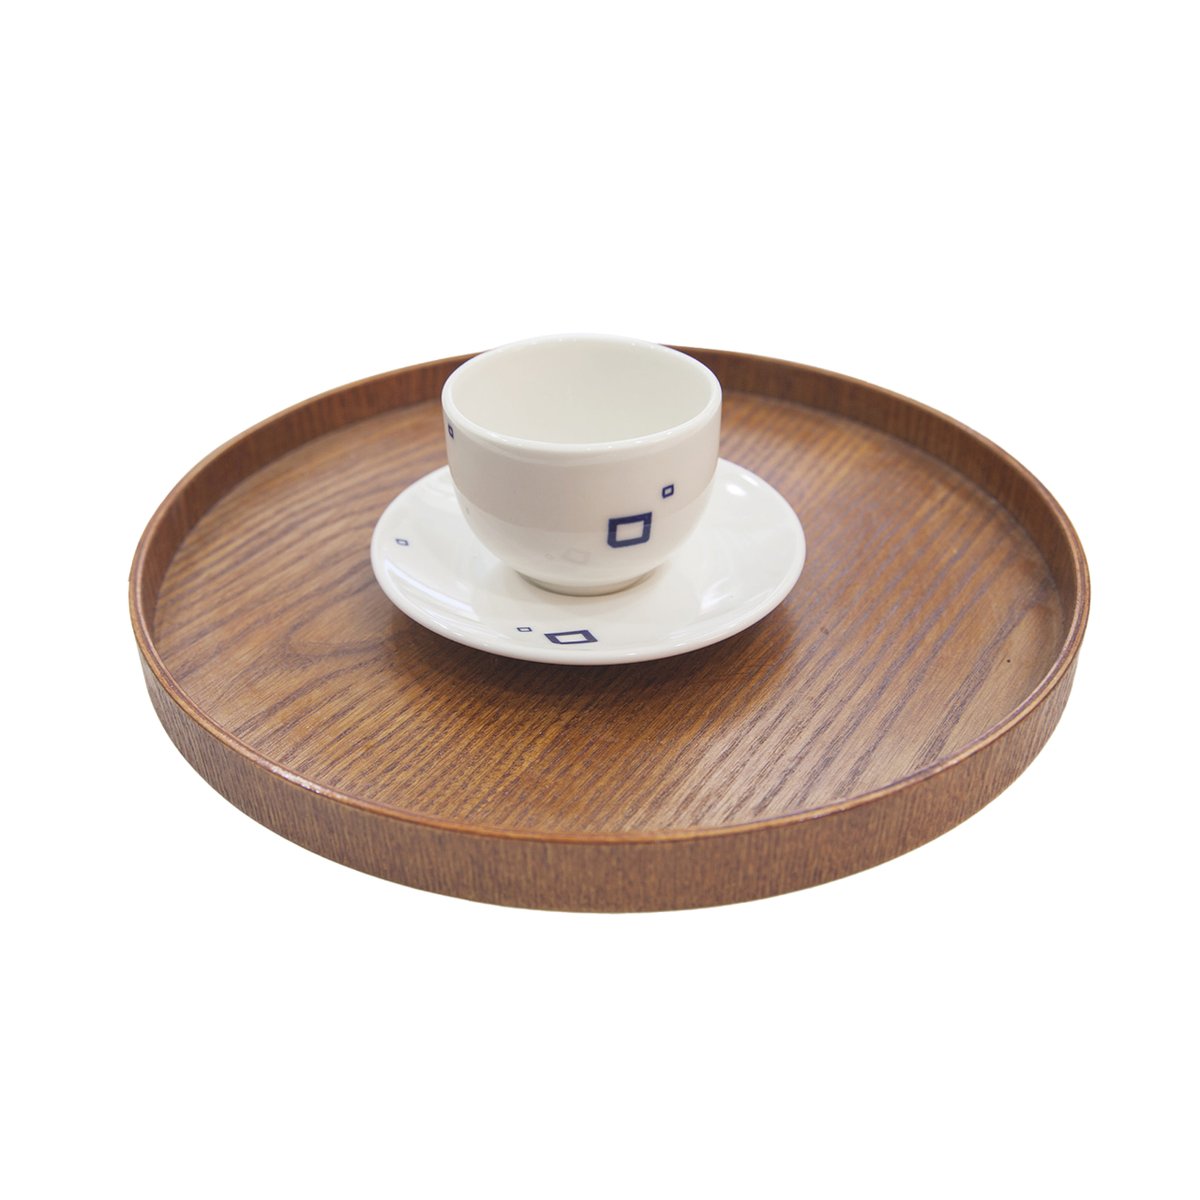 Discover the charm of Korean culture with our Hangeul pattern cups! Elevate your tea or dessert game with these elegant sets!

#koreanproduct #koreanthing #koreangifts #Koreanstyle #koreanfashion #kfashion #kstyle #Koreanlifestyle #Koreangoods #seoul #seoulshopping #biroso